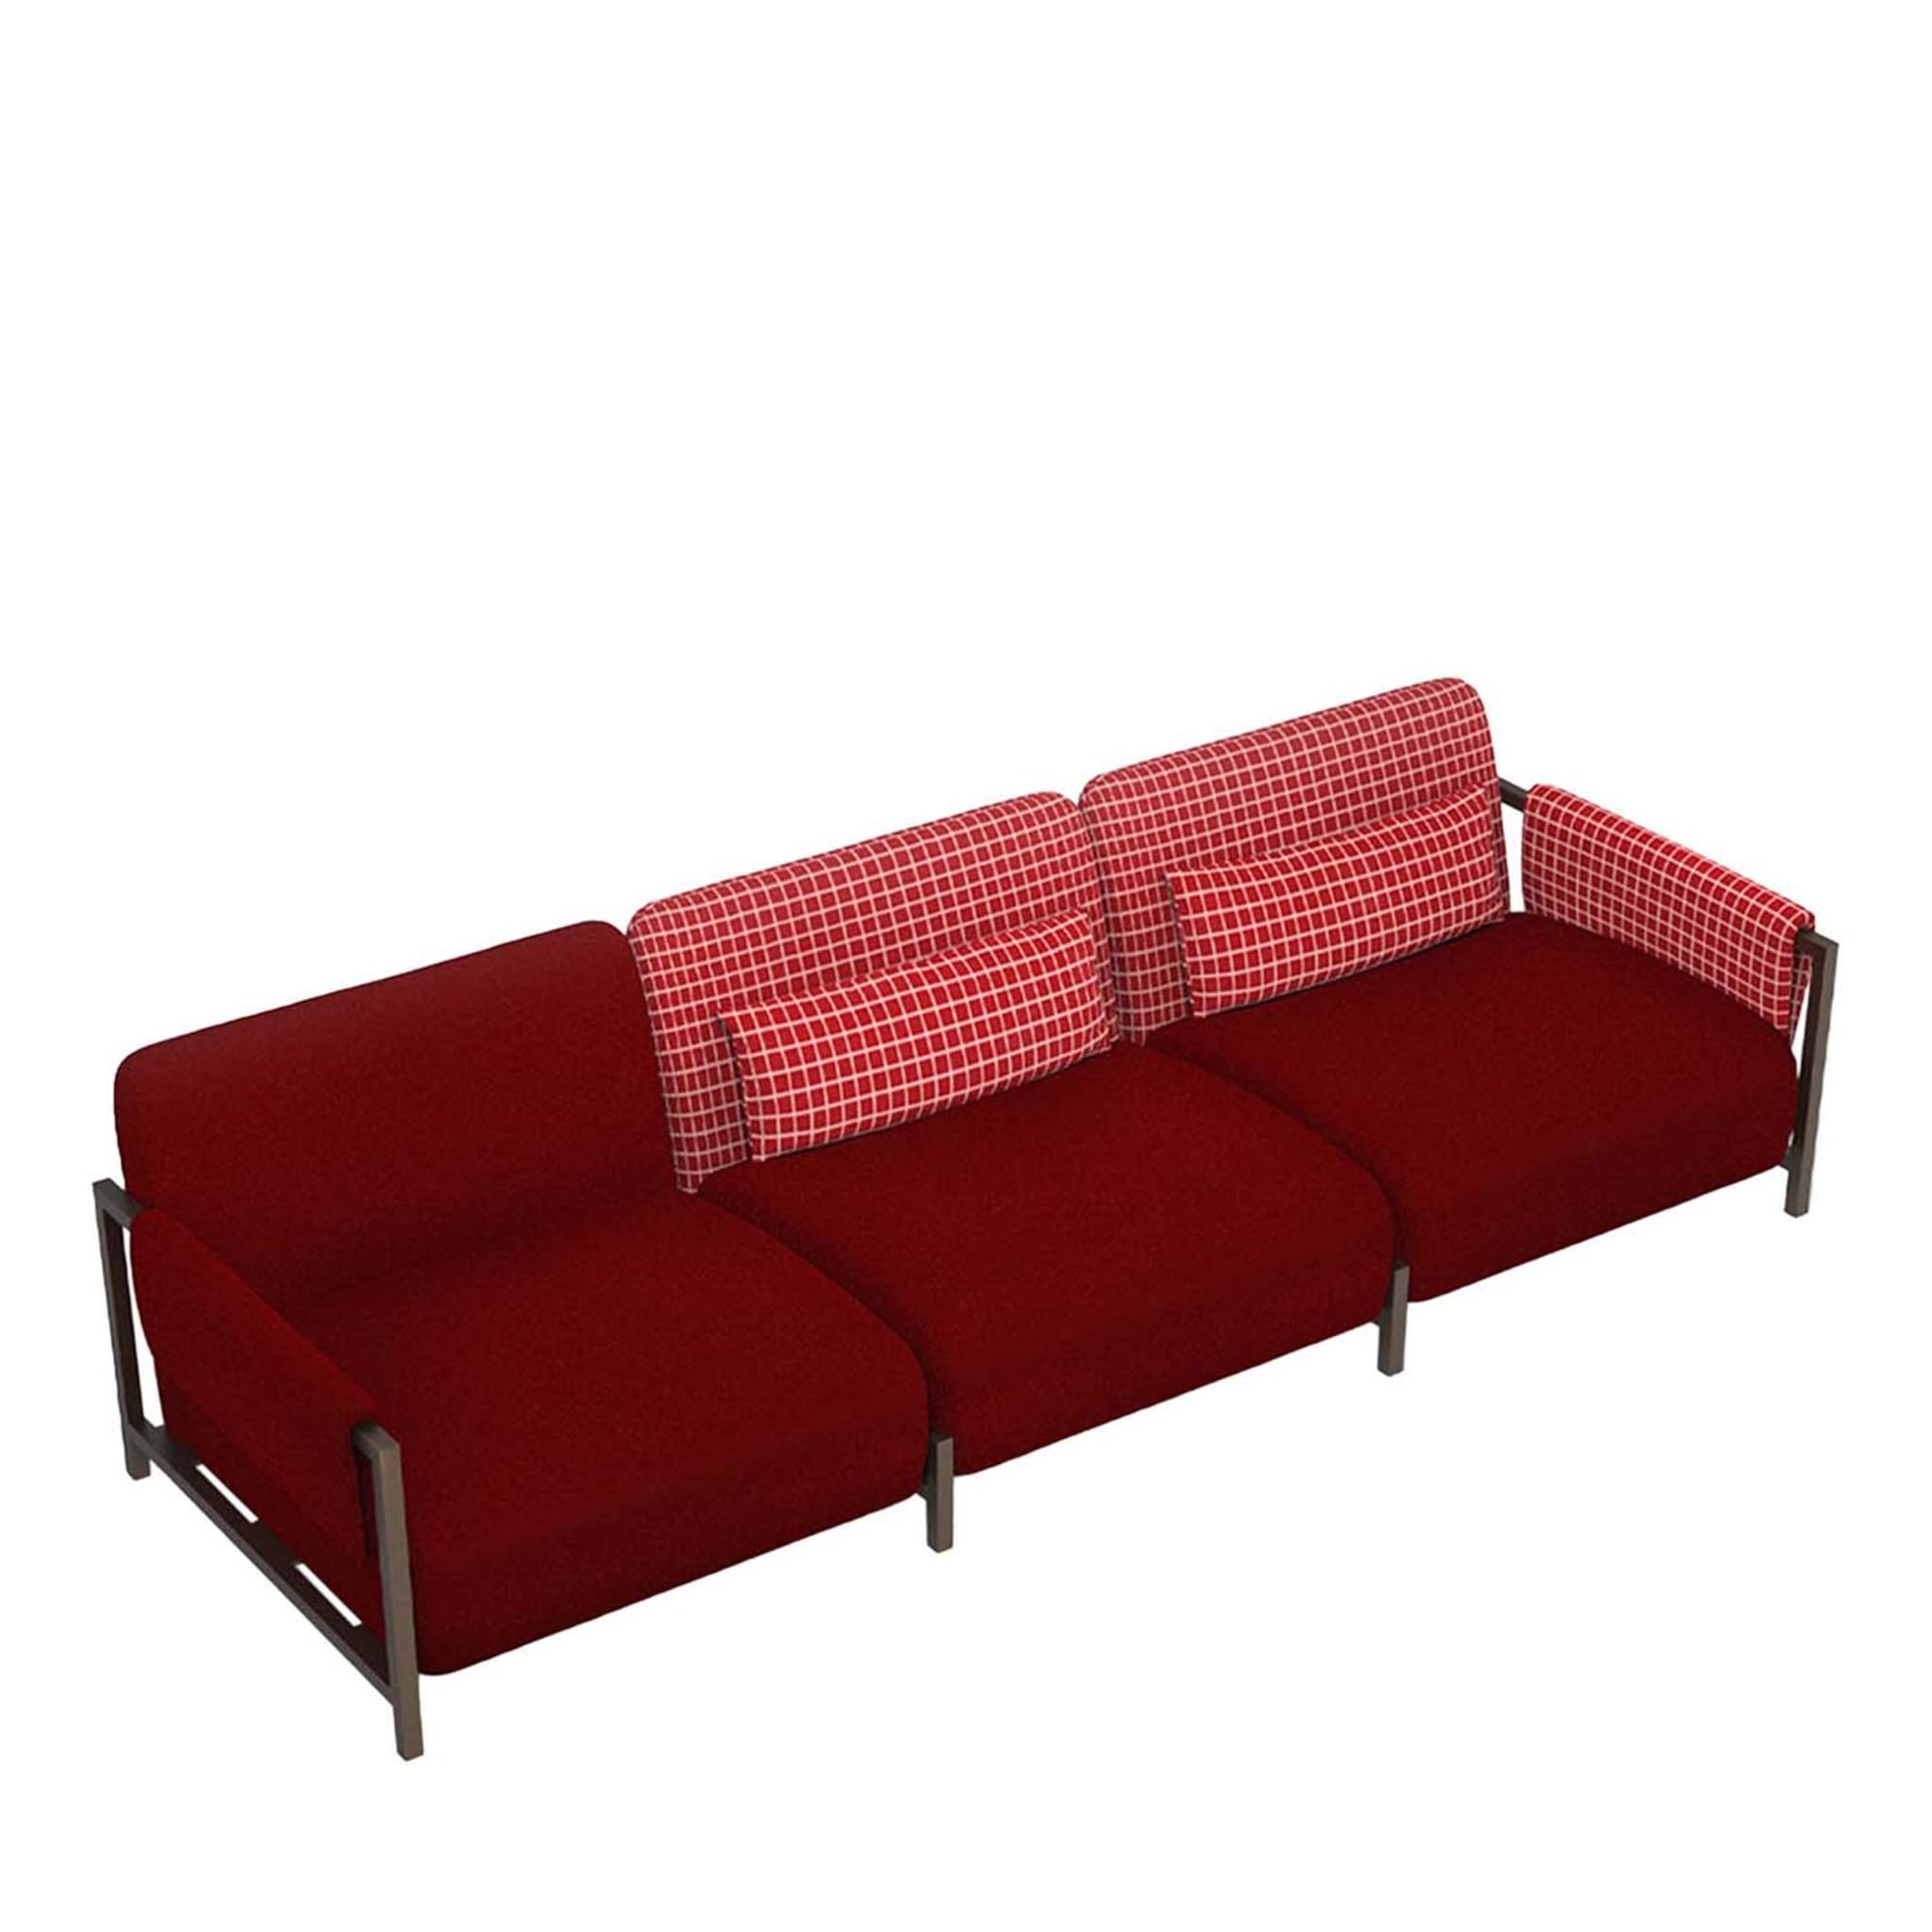 Butler 3-Seater Red Sofa - Main view